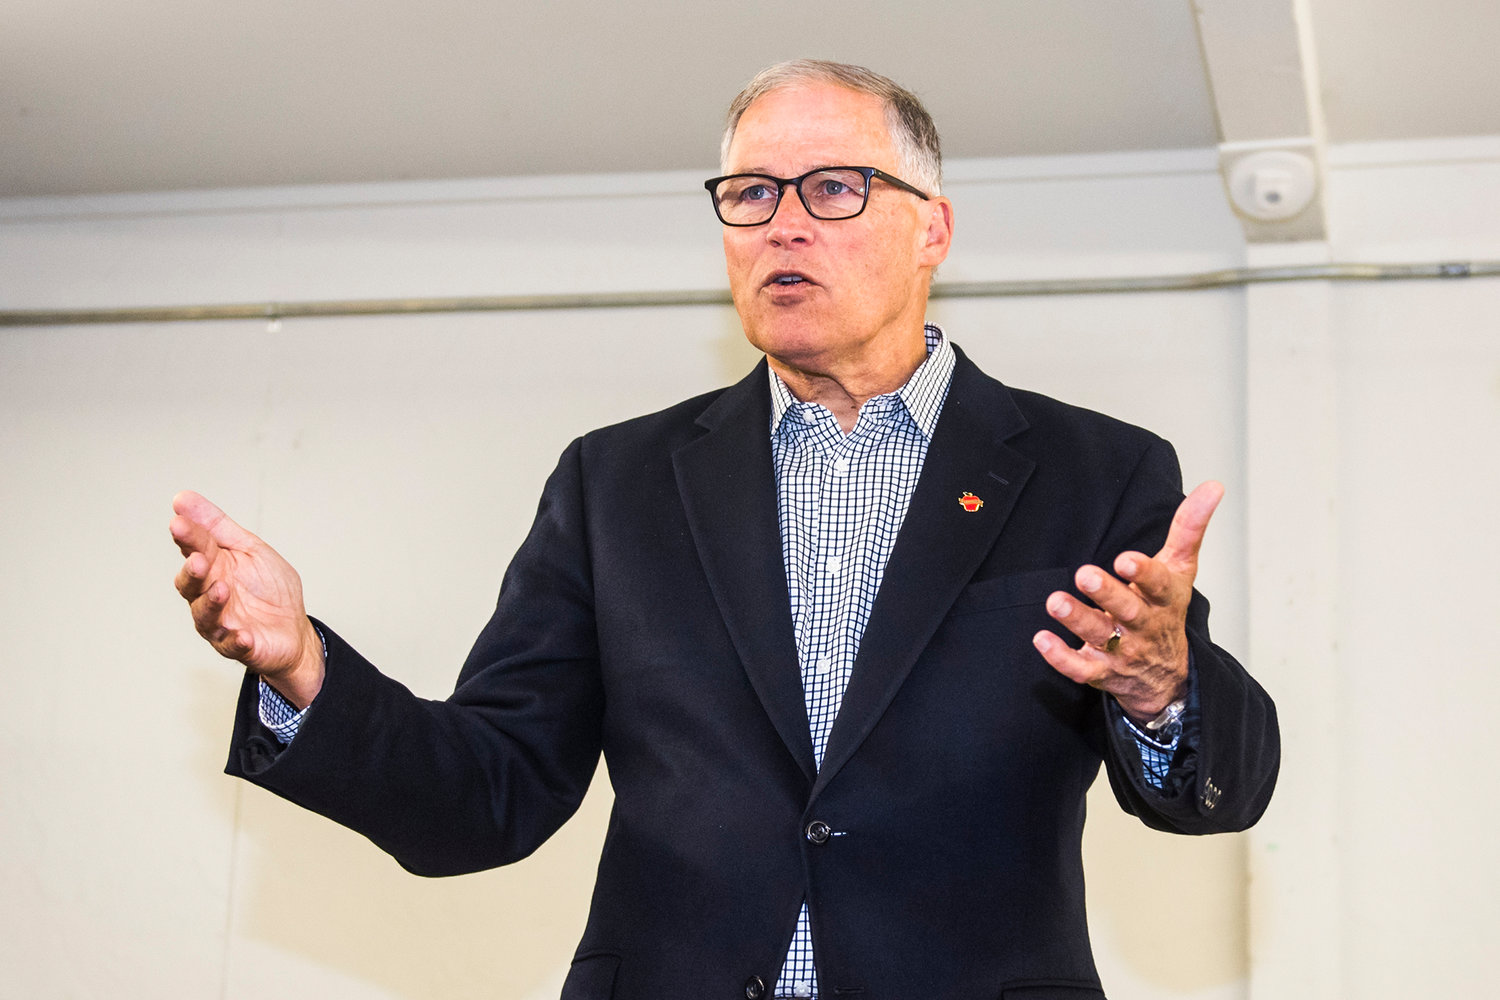 FILE PHOTO — Gov. Jay Inslee talks during a tour of the cold weather shelter in November 2019 at the Southwest Washington Fairgrounds in Chehalis.